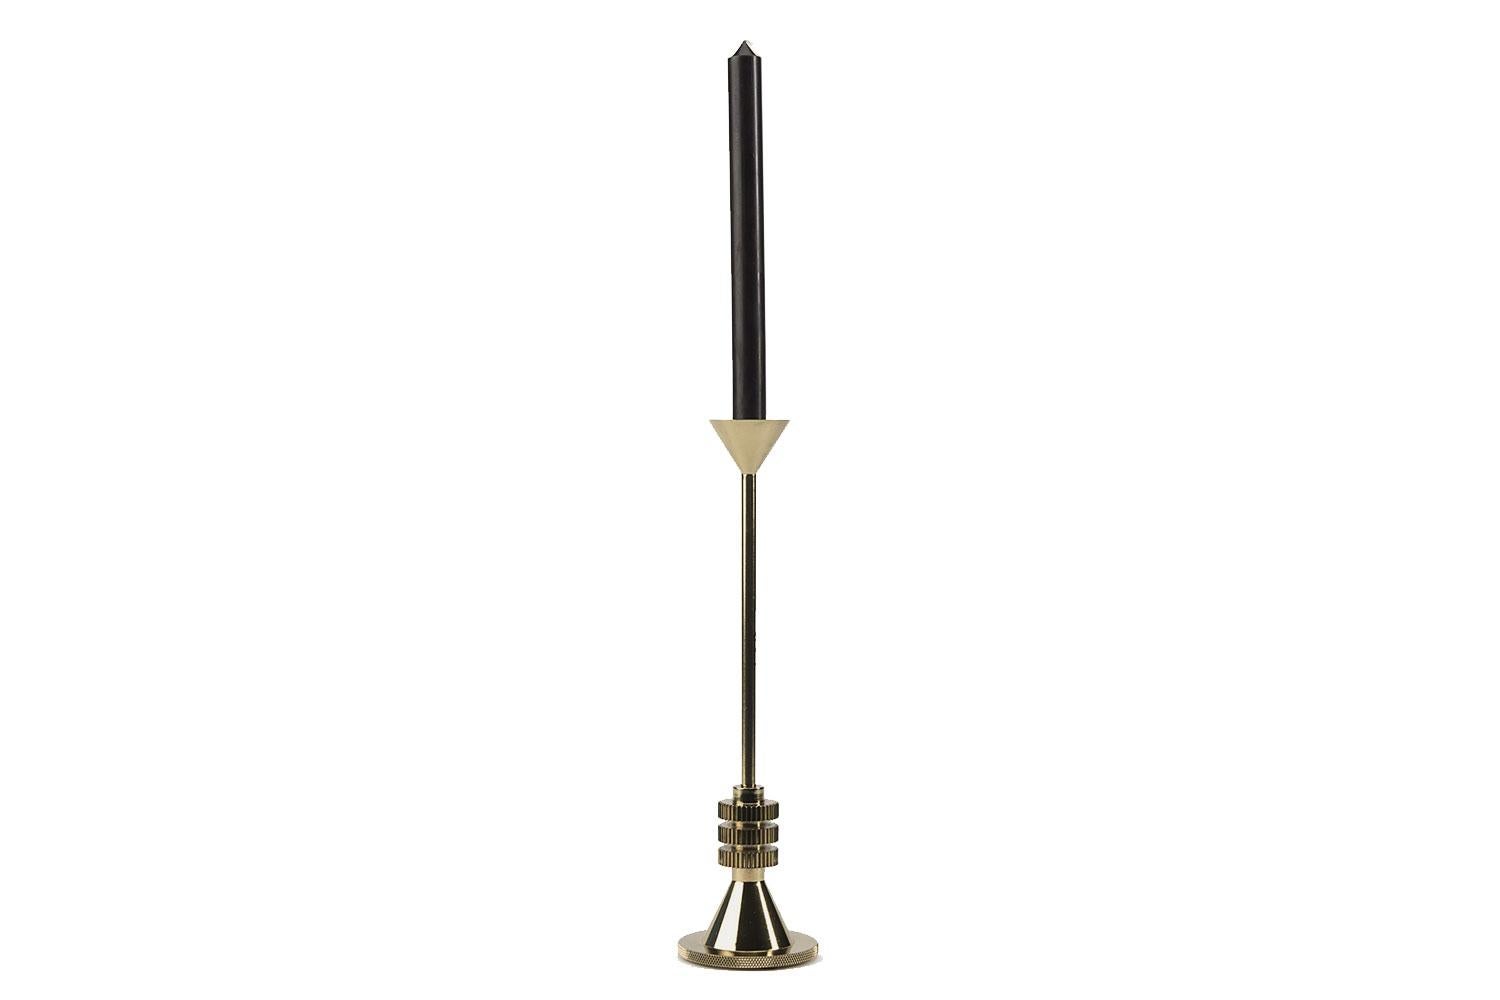 These brass plated solid aluminum cog medium and cog tall candleholders are part of the iconic and Industrial inspired cog collection from Tom Dixon.

Tom Dixon has become one of the most popular and sought-after designers for home accessories and